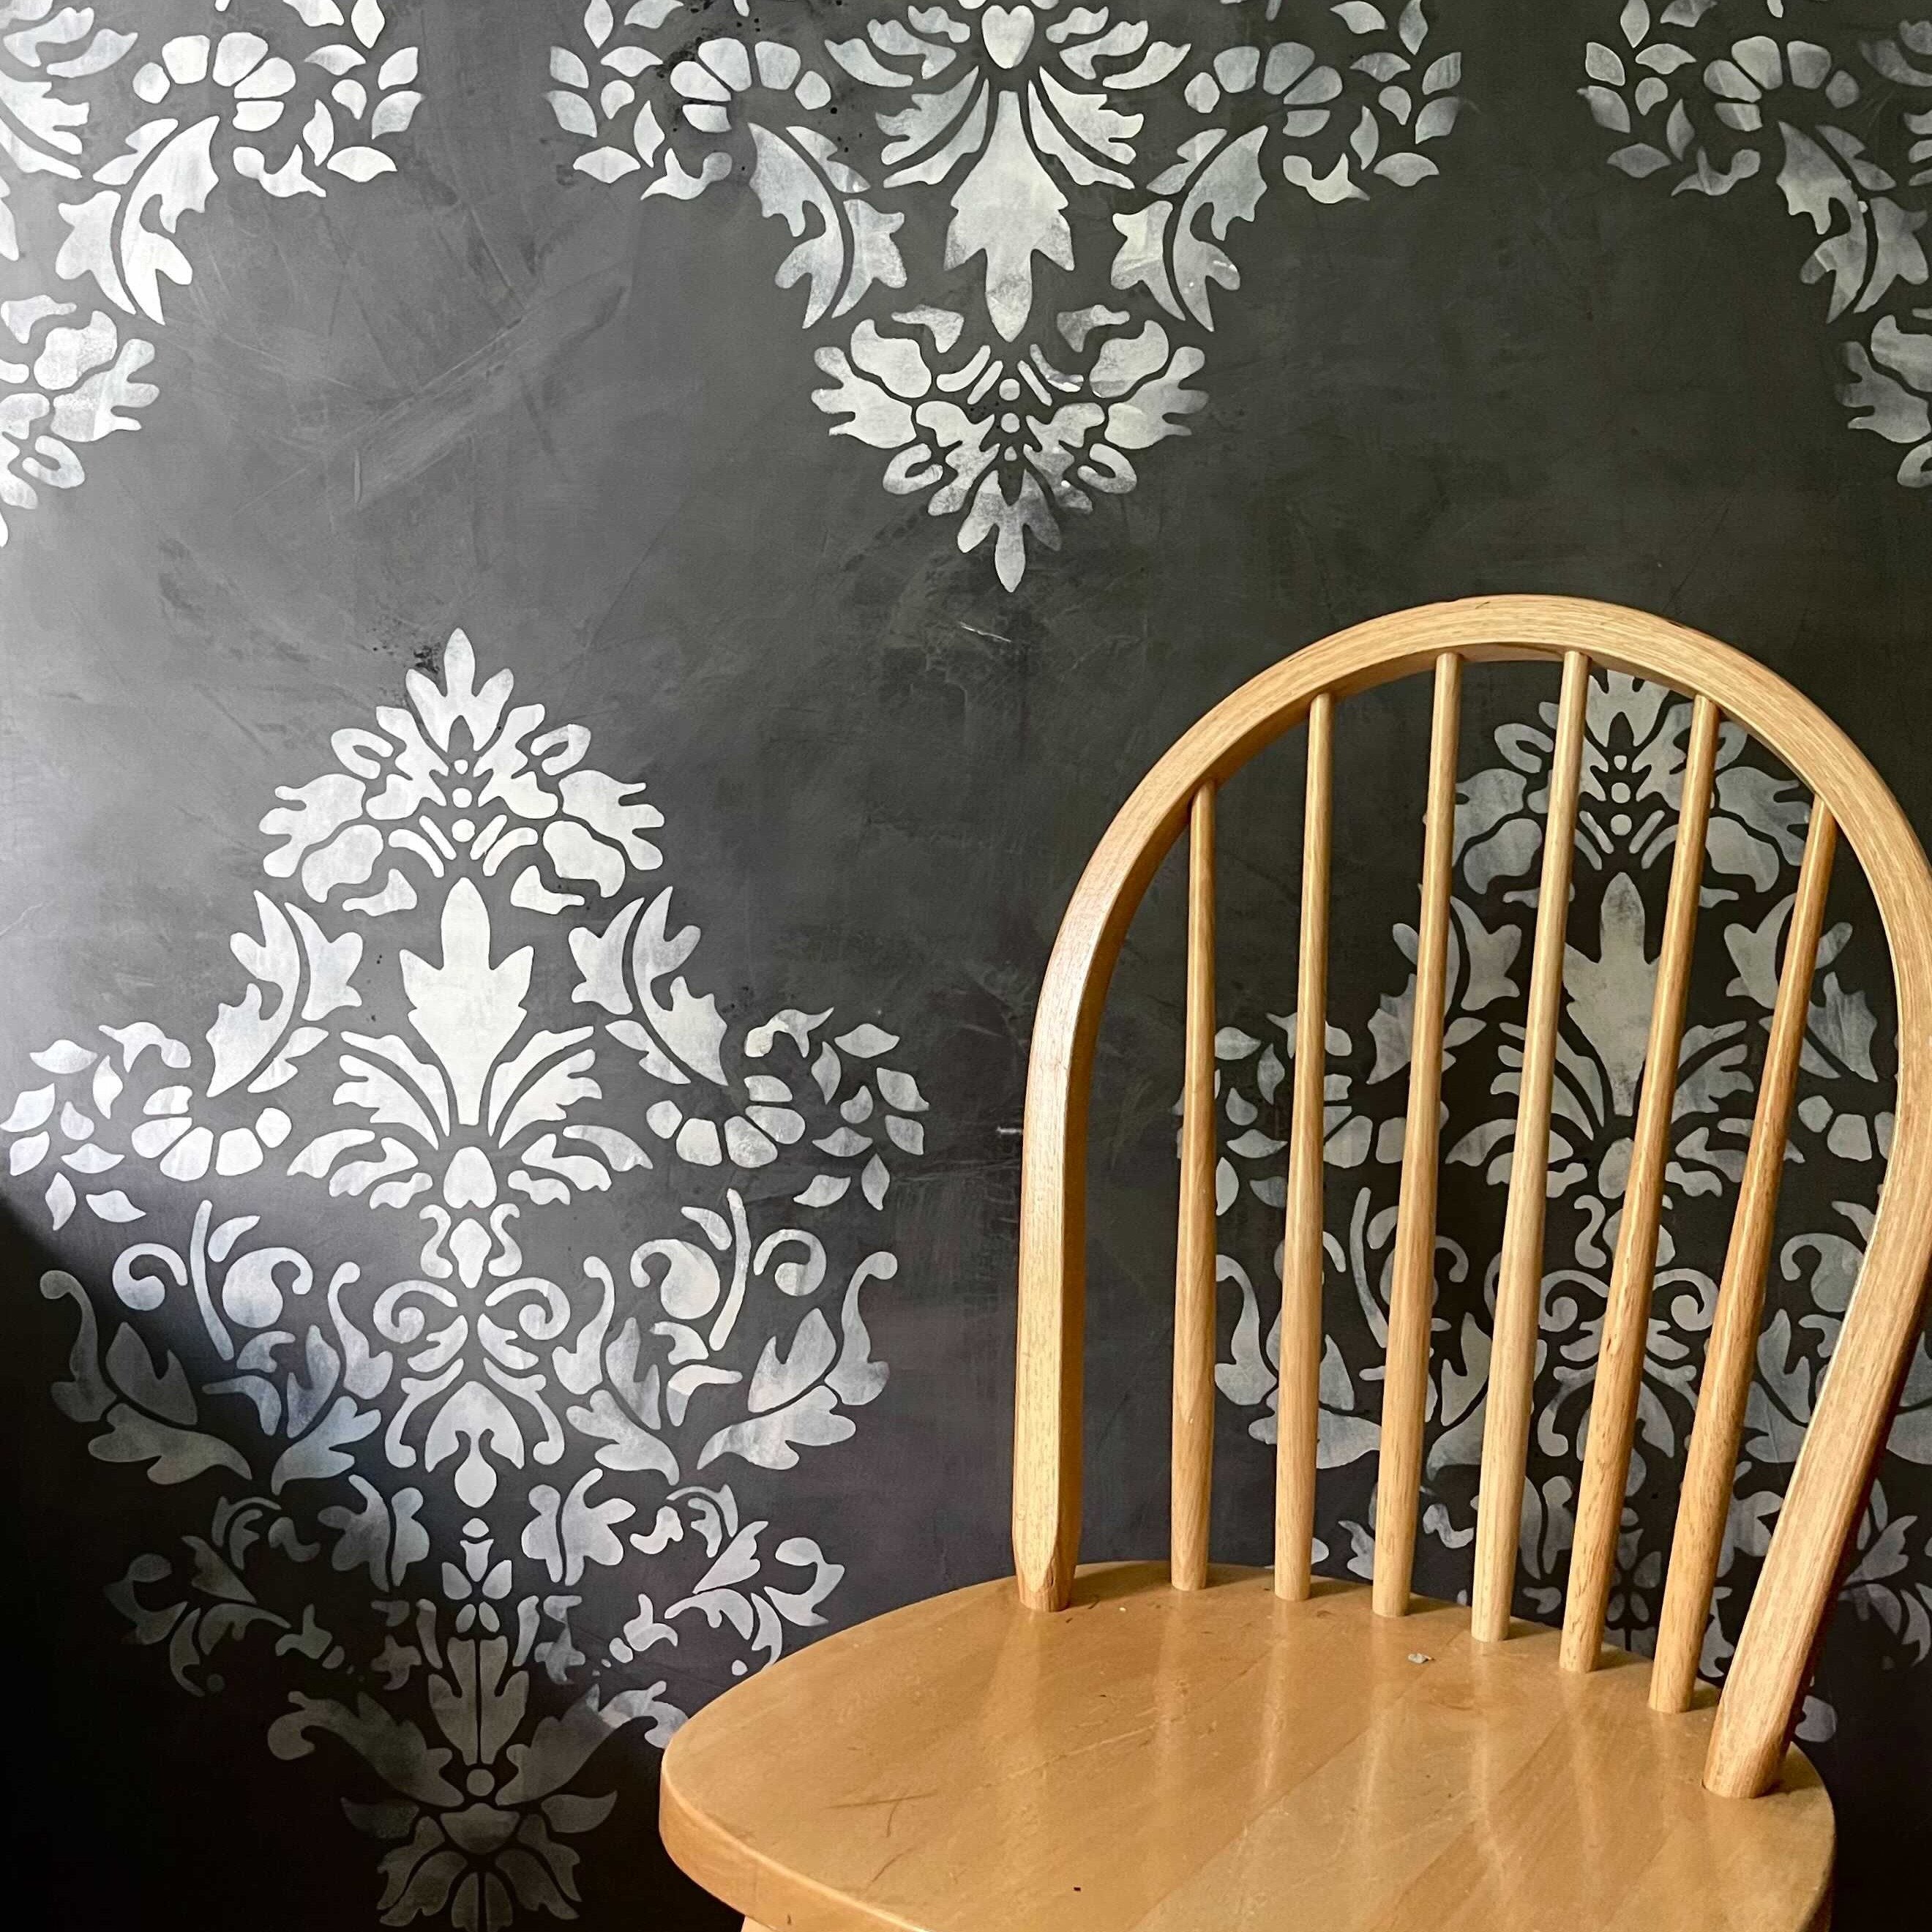 stenciled damask design painted on wall